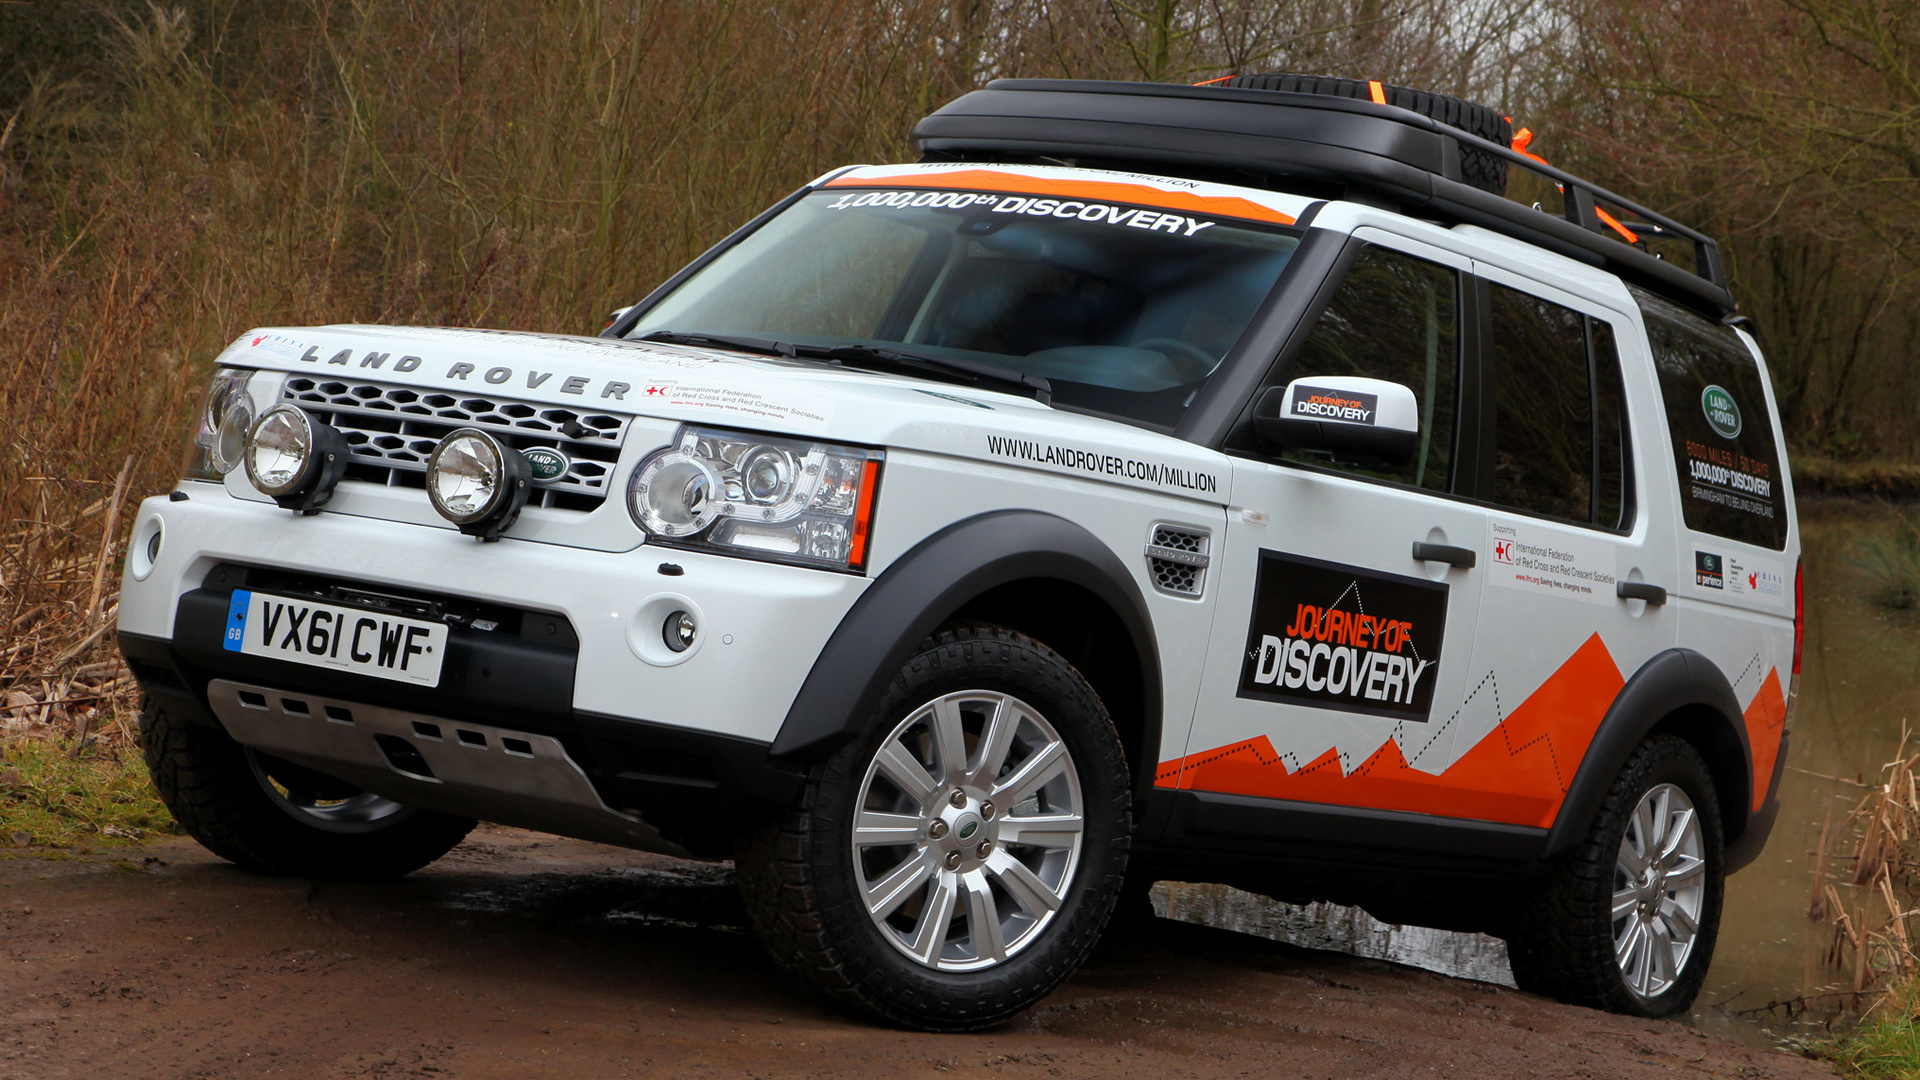 2012 Land Rover Discovery 4 Expedition Vehicle - Wallpapers and HD ...